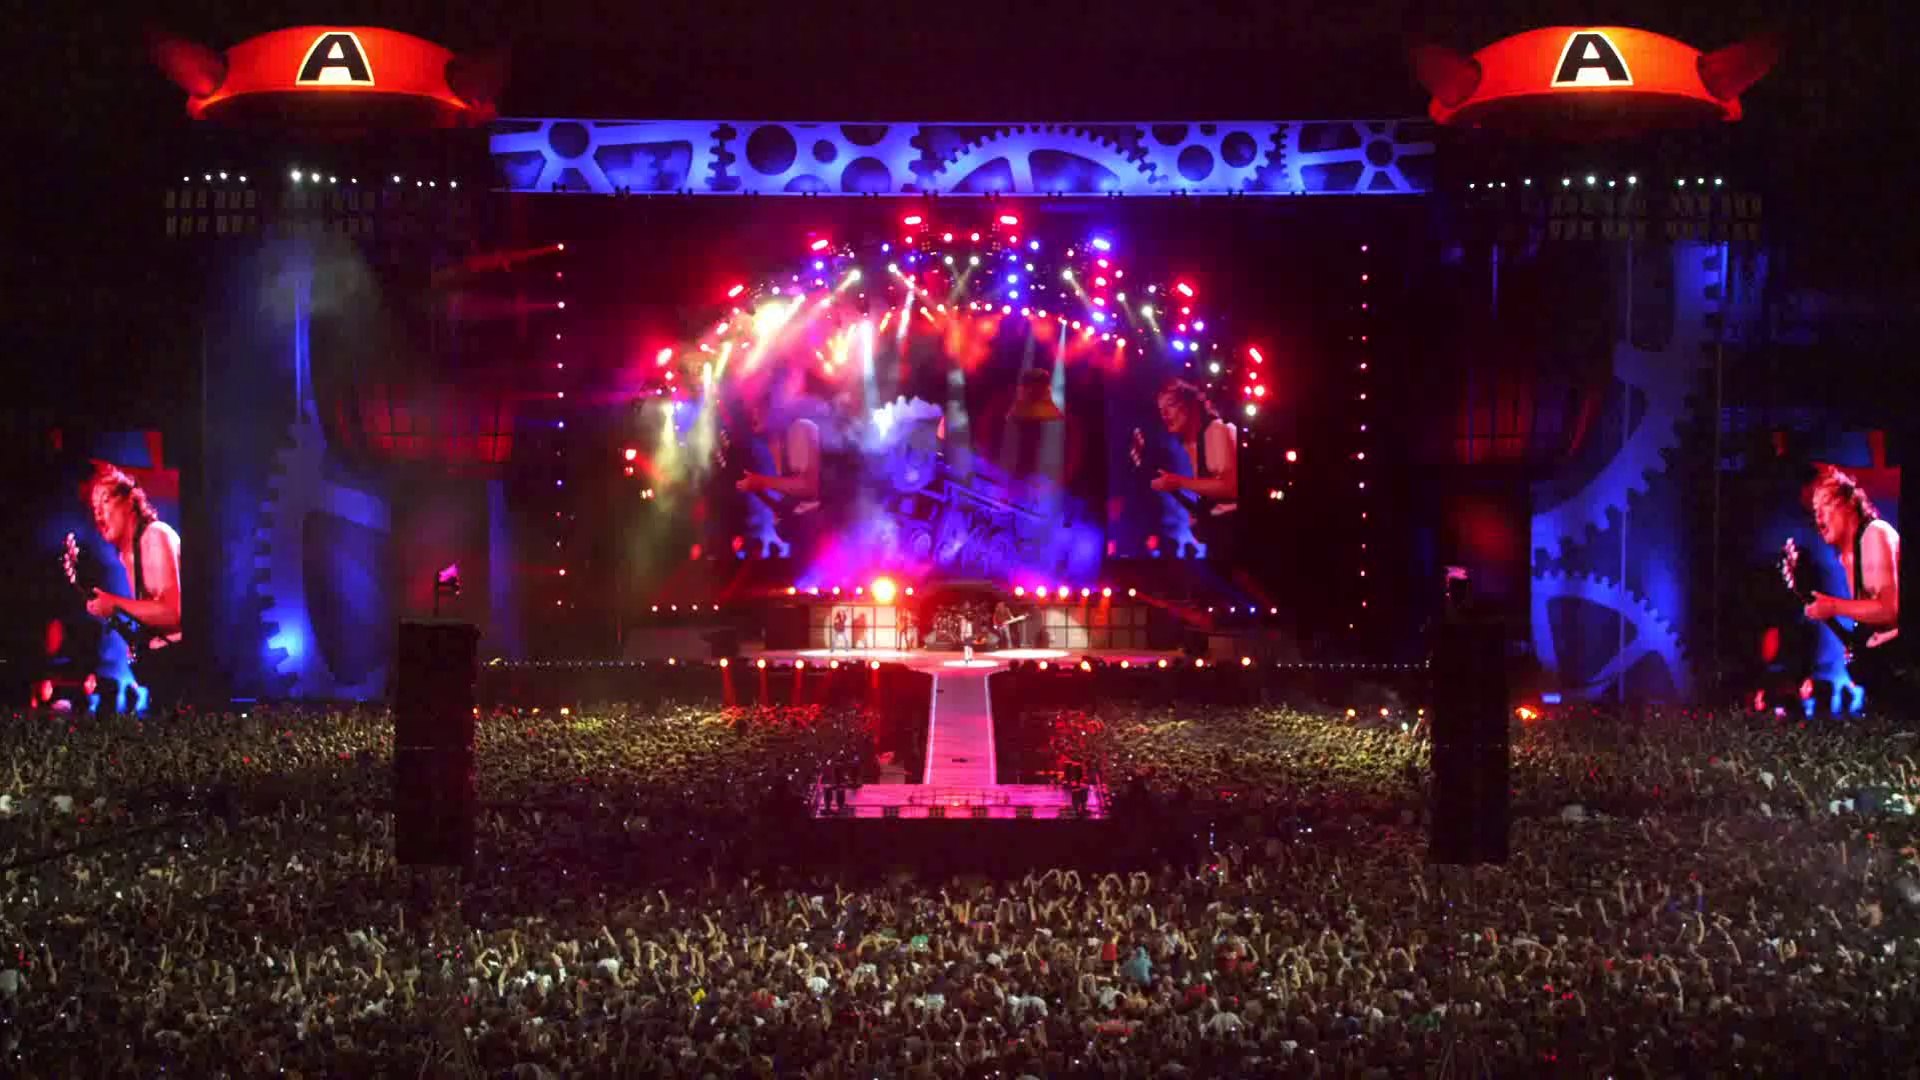 ACDC Hell's Bells [Live at River Plate] - video Dailymotion